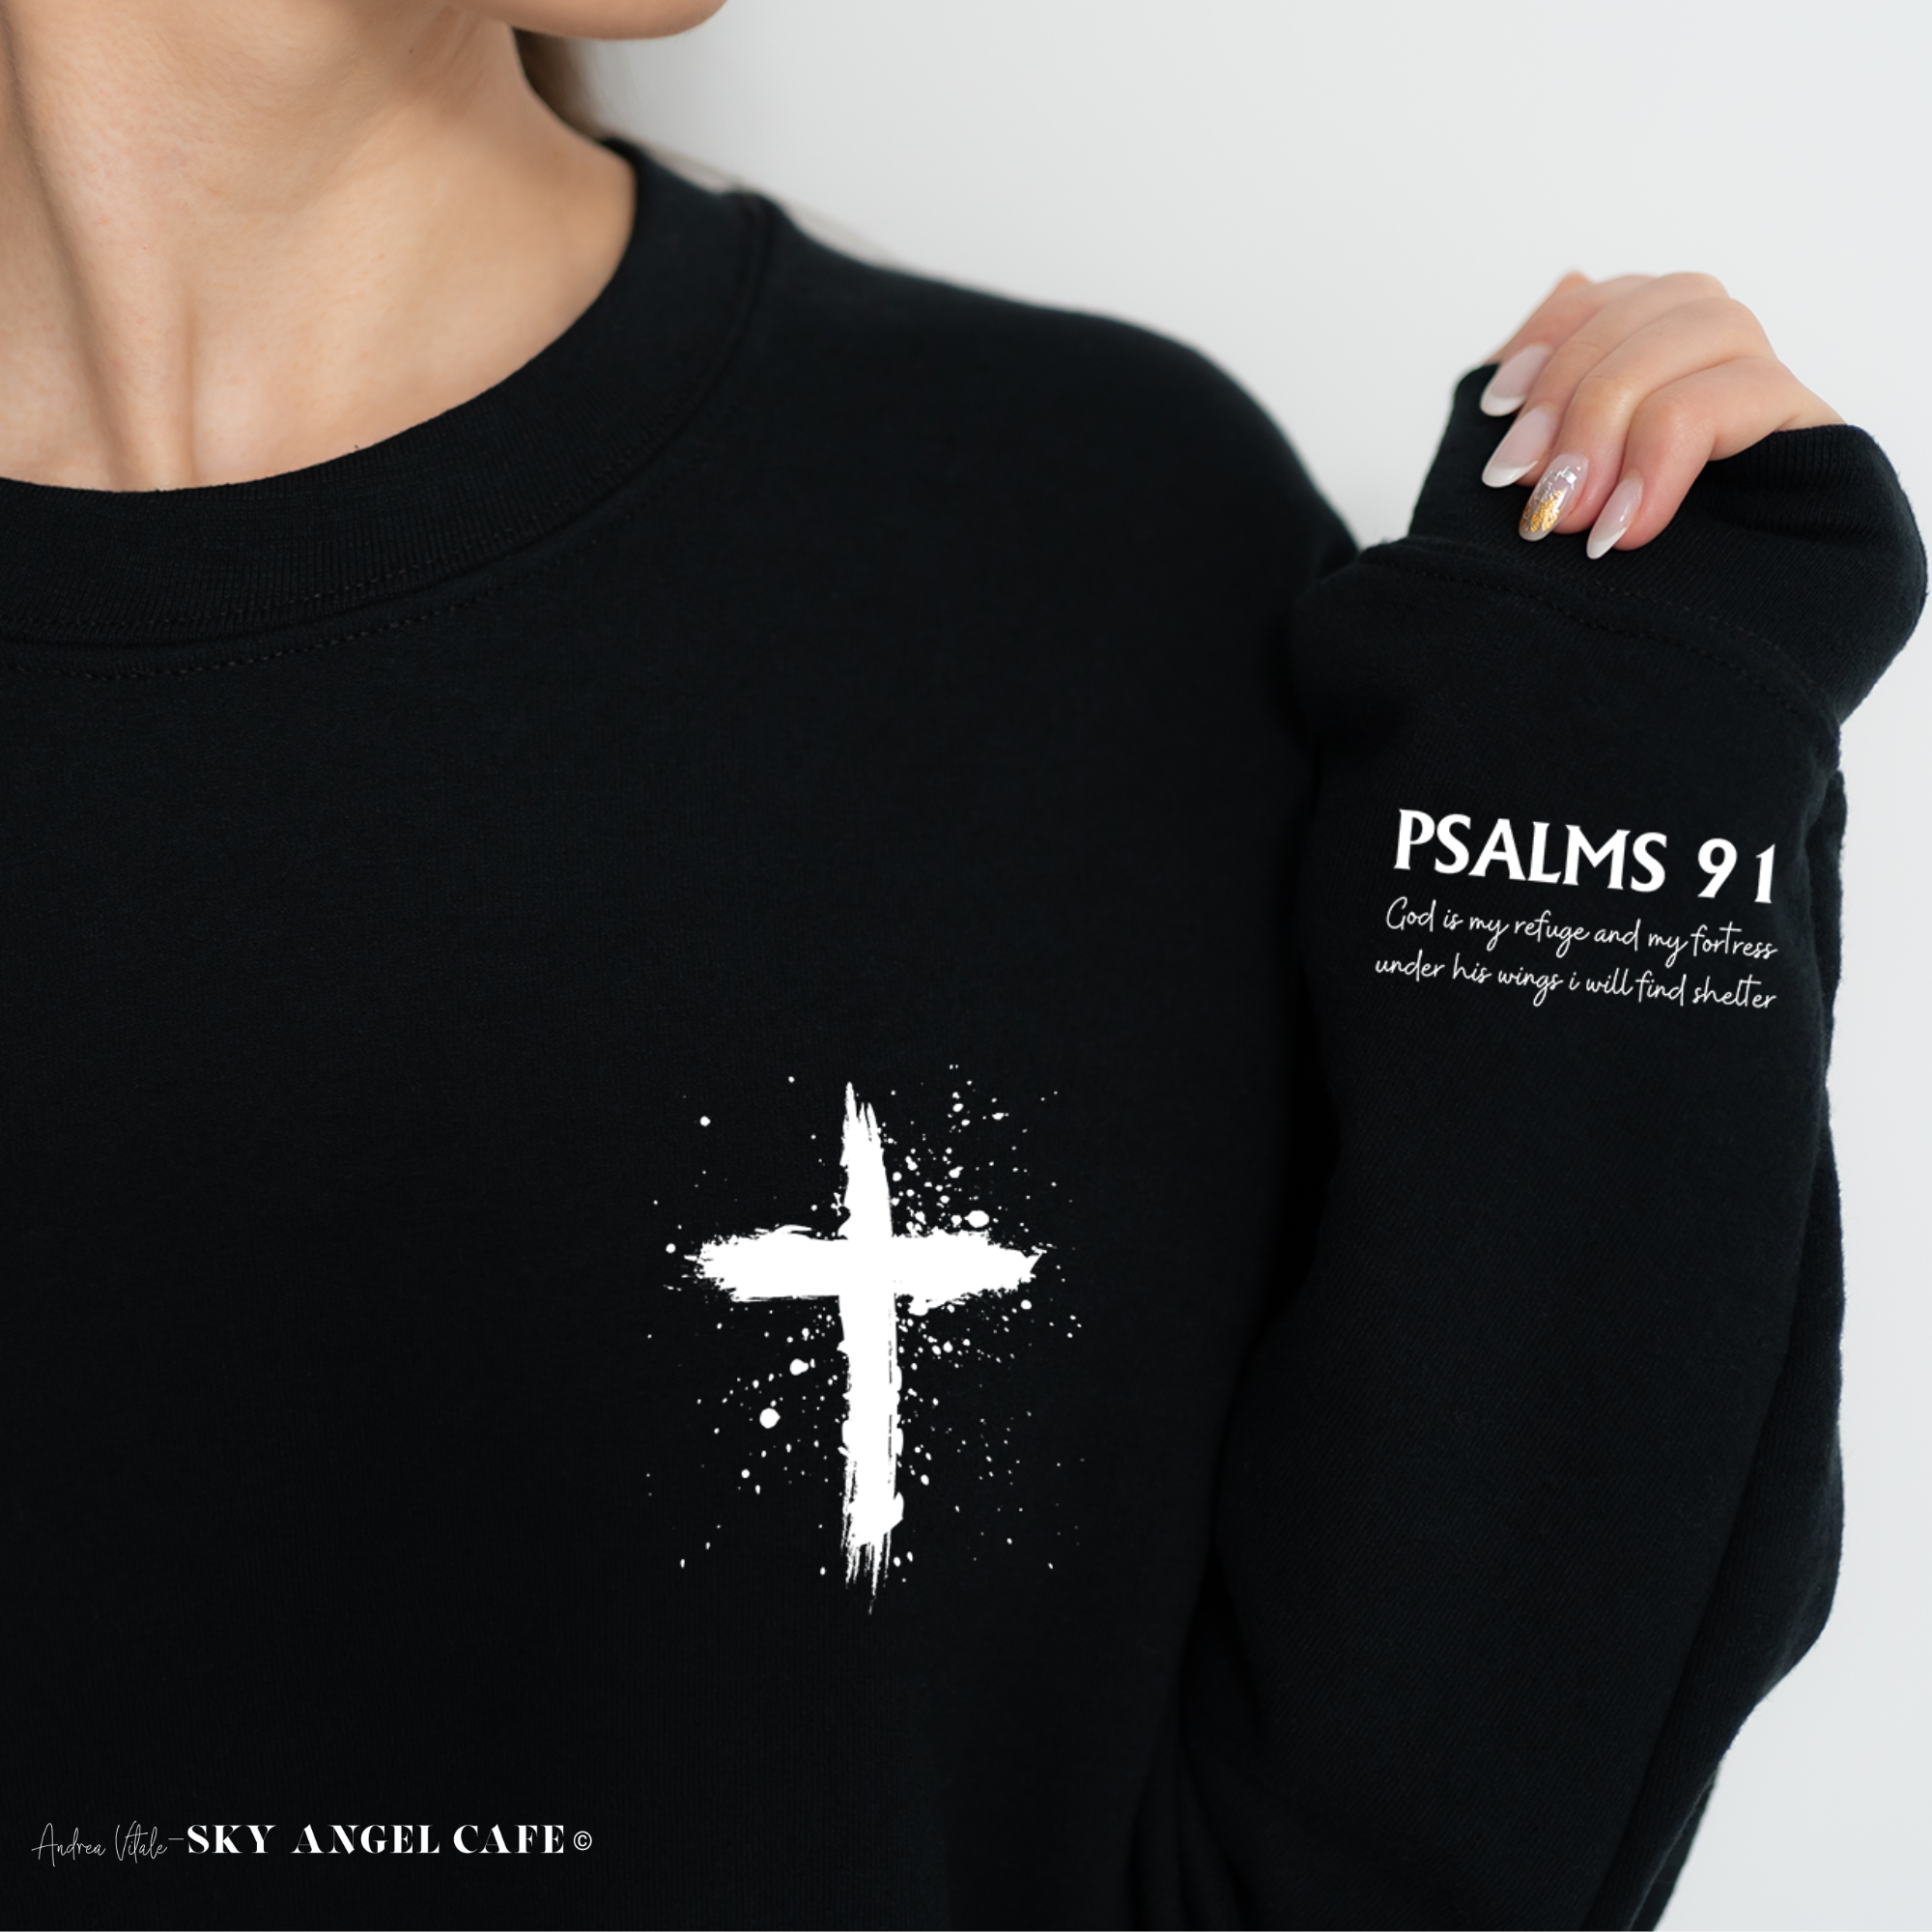 Cross with Psalms91 White Text Sleeve - Black G18000-Sky Angel Cafe